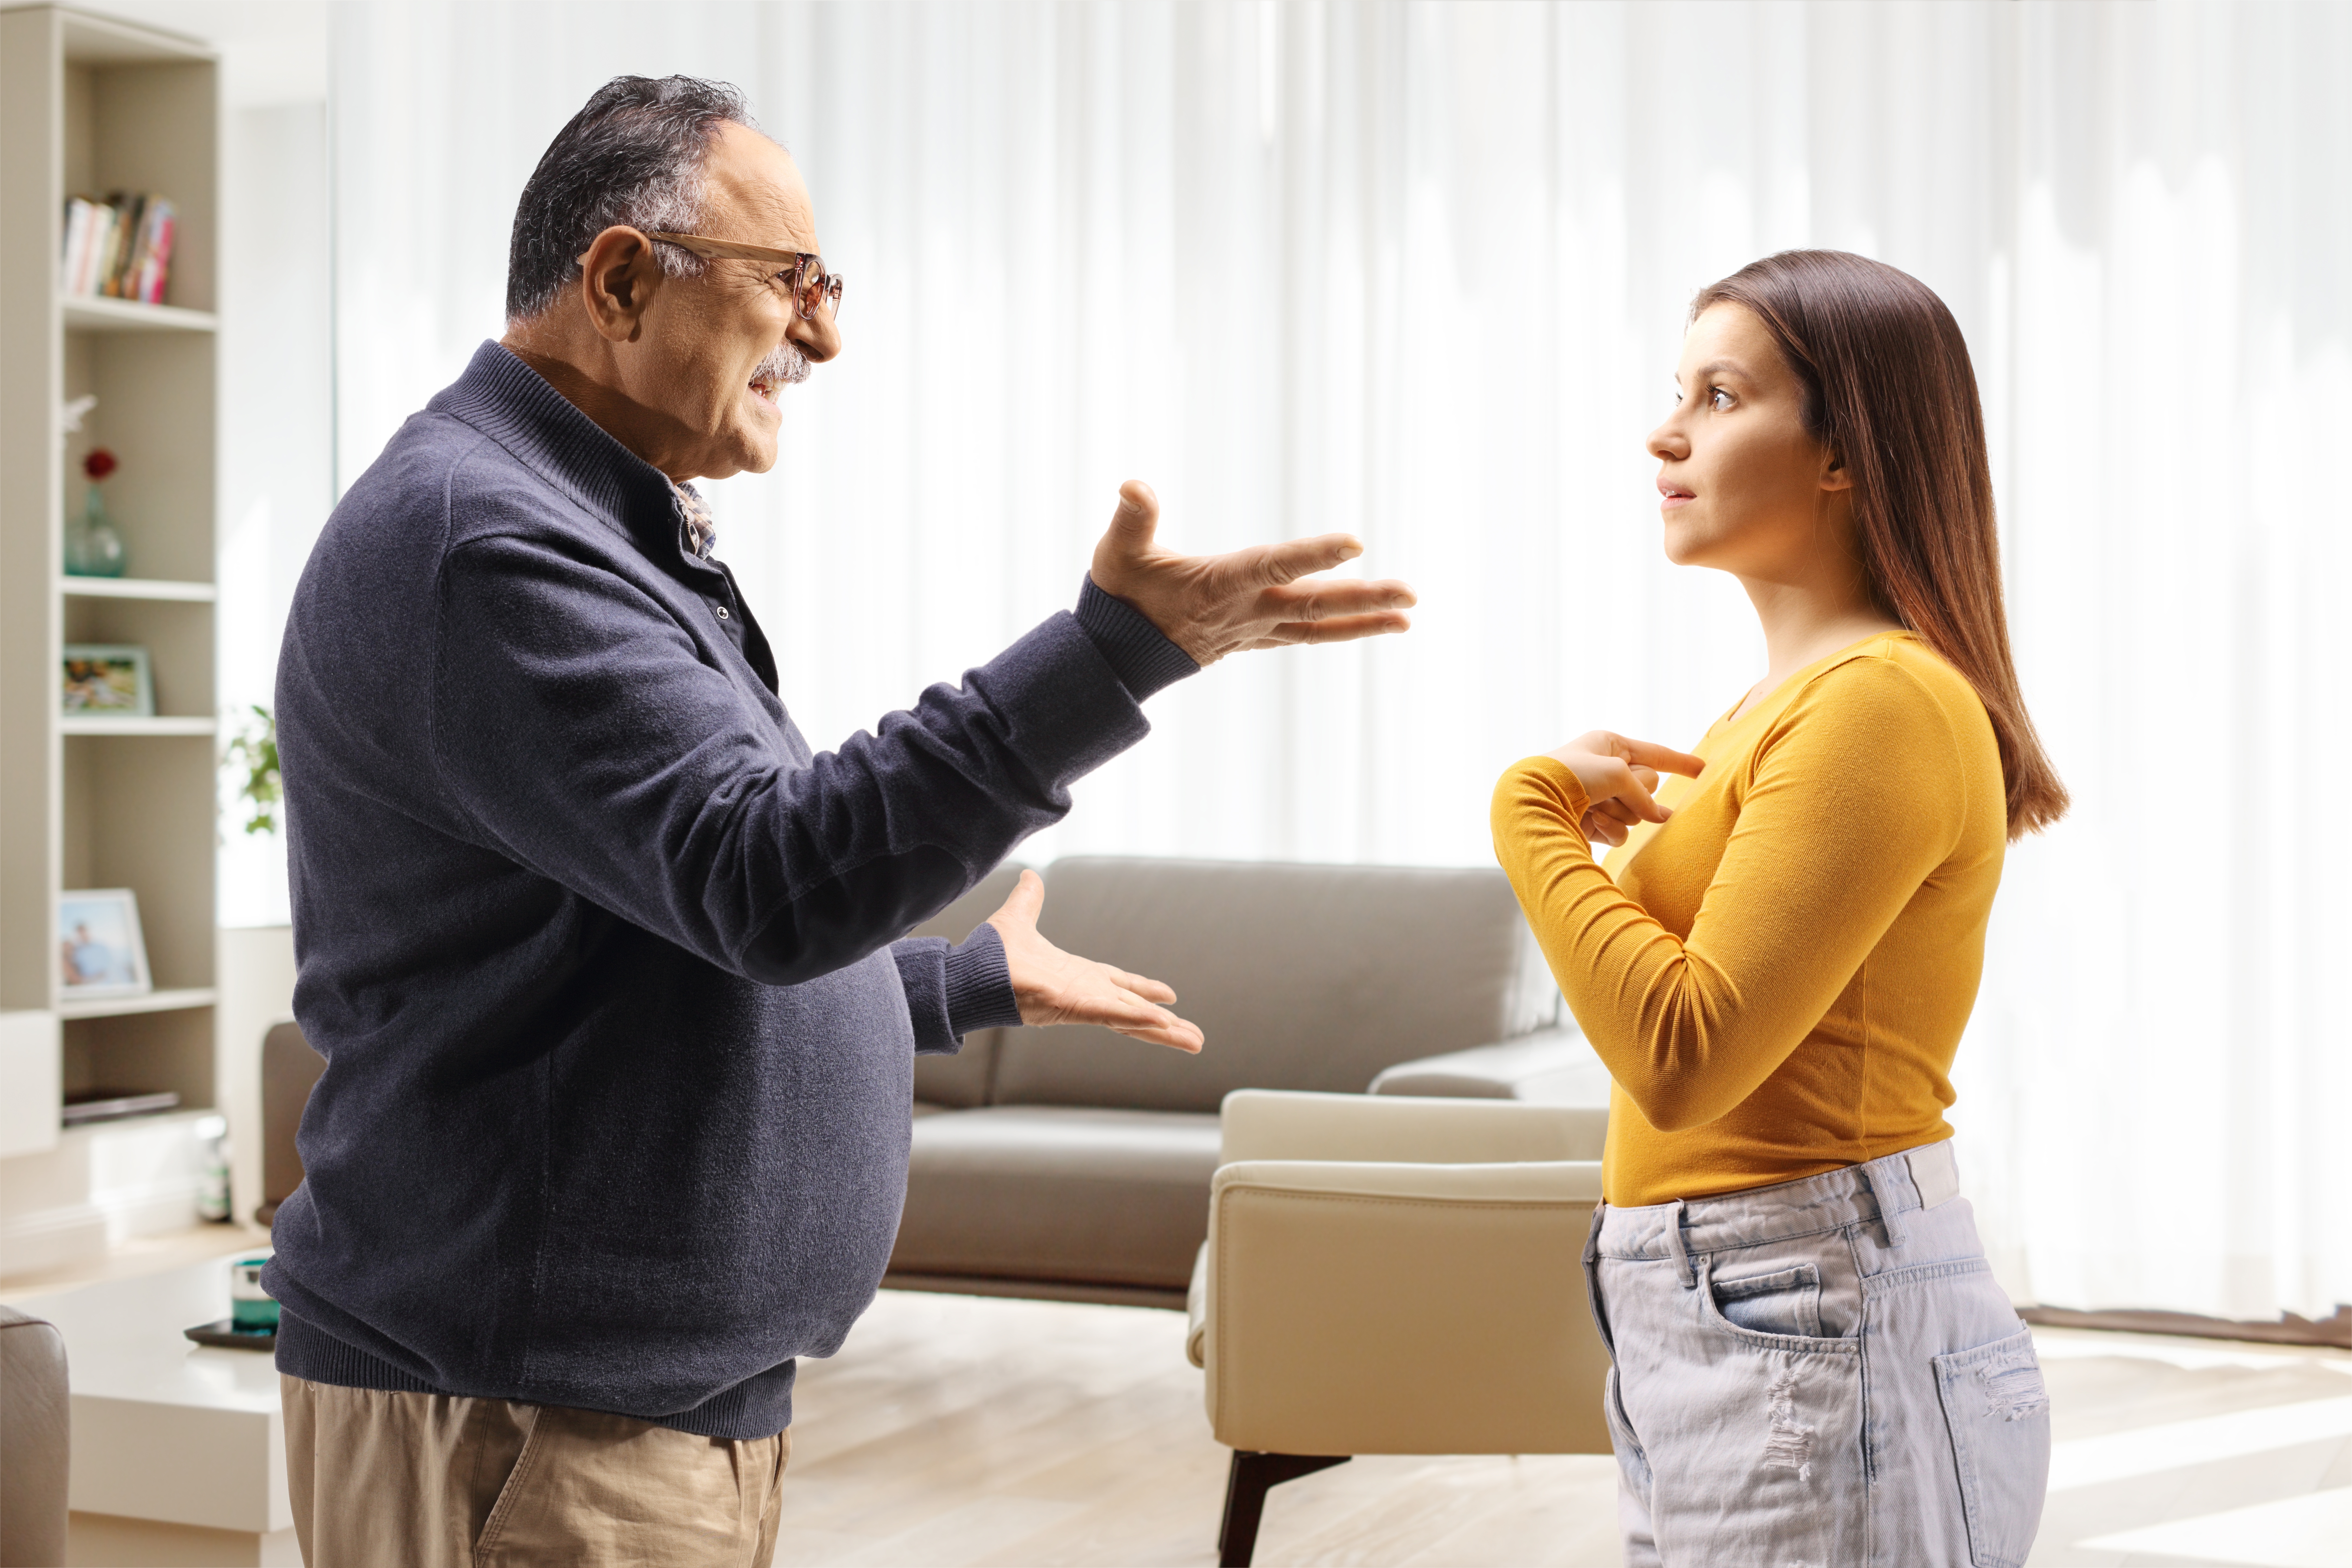 An angry father arguing with his daughter at home | Source: Shutterstock